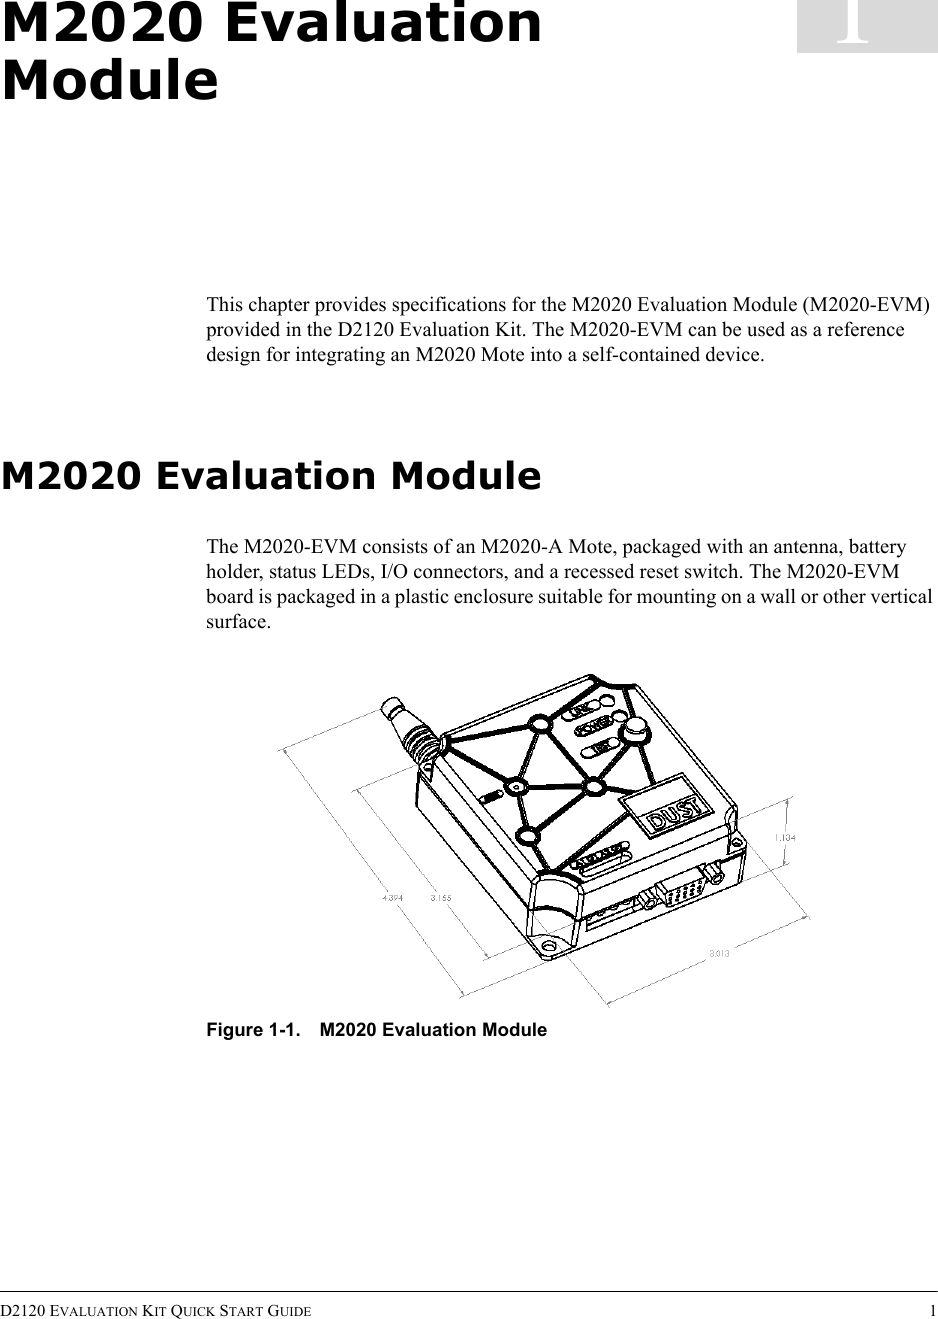 D2120 EVALUATION KIT QUICK START GUIDE 11M2020 Evaluation ModuleThis chapter provides specifications for the M2020 Evaluation Module (M2020-EVM) provided in the D2120 Evaluation Kit. The M2020-EVM can be used as a reference design for integrating an M2020 Mote into a self-contained device.M2020 Evaluation ModuleThe M2020-EVM consists of an M2020-A Mote, packaged with an antenna, battery holder, status LEDs, I/O connectors, and a recessed reset switch. The M2020-EVM board is packaged in a plastic enclosure suitable for mounting on a wall or other vertical surface.Figure 1-1. M2020 Evaluation Module